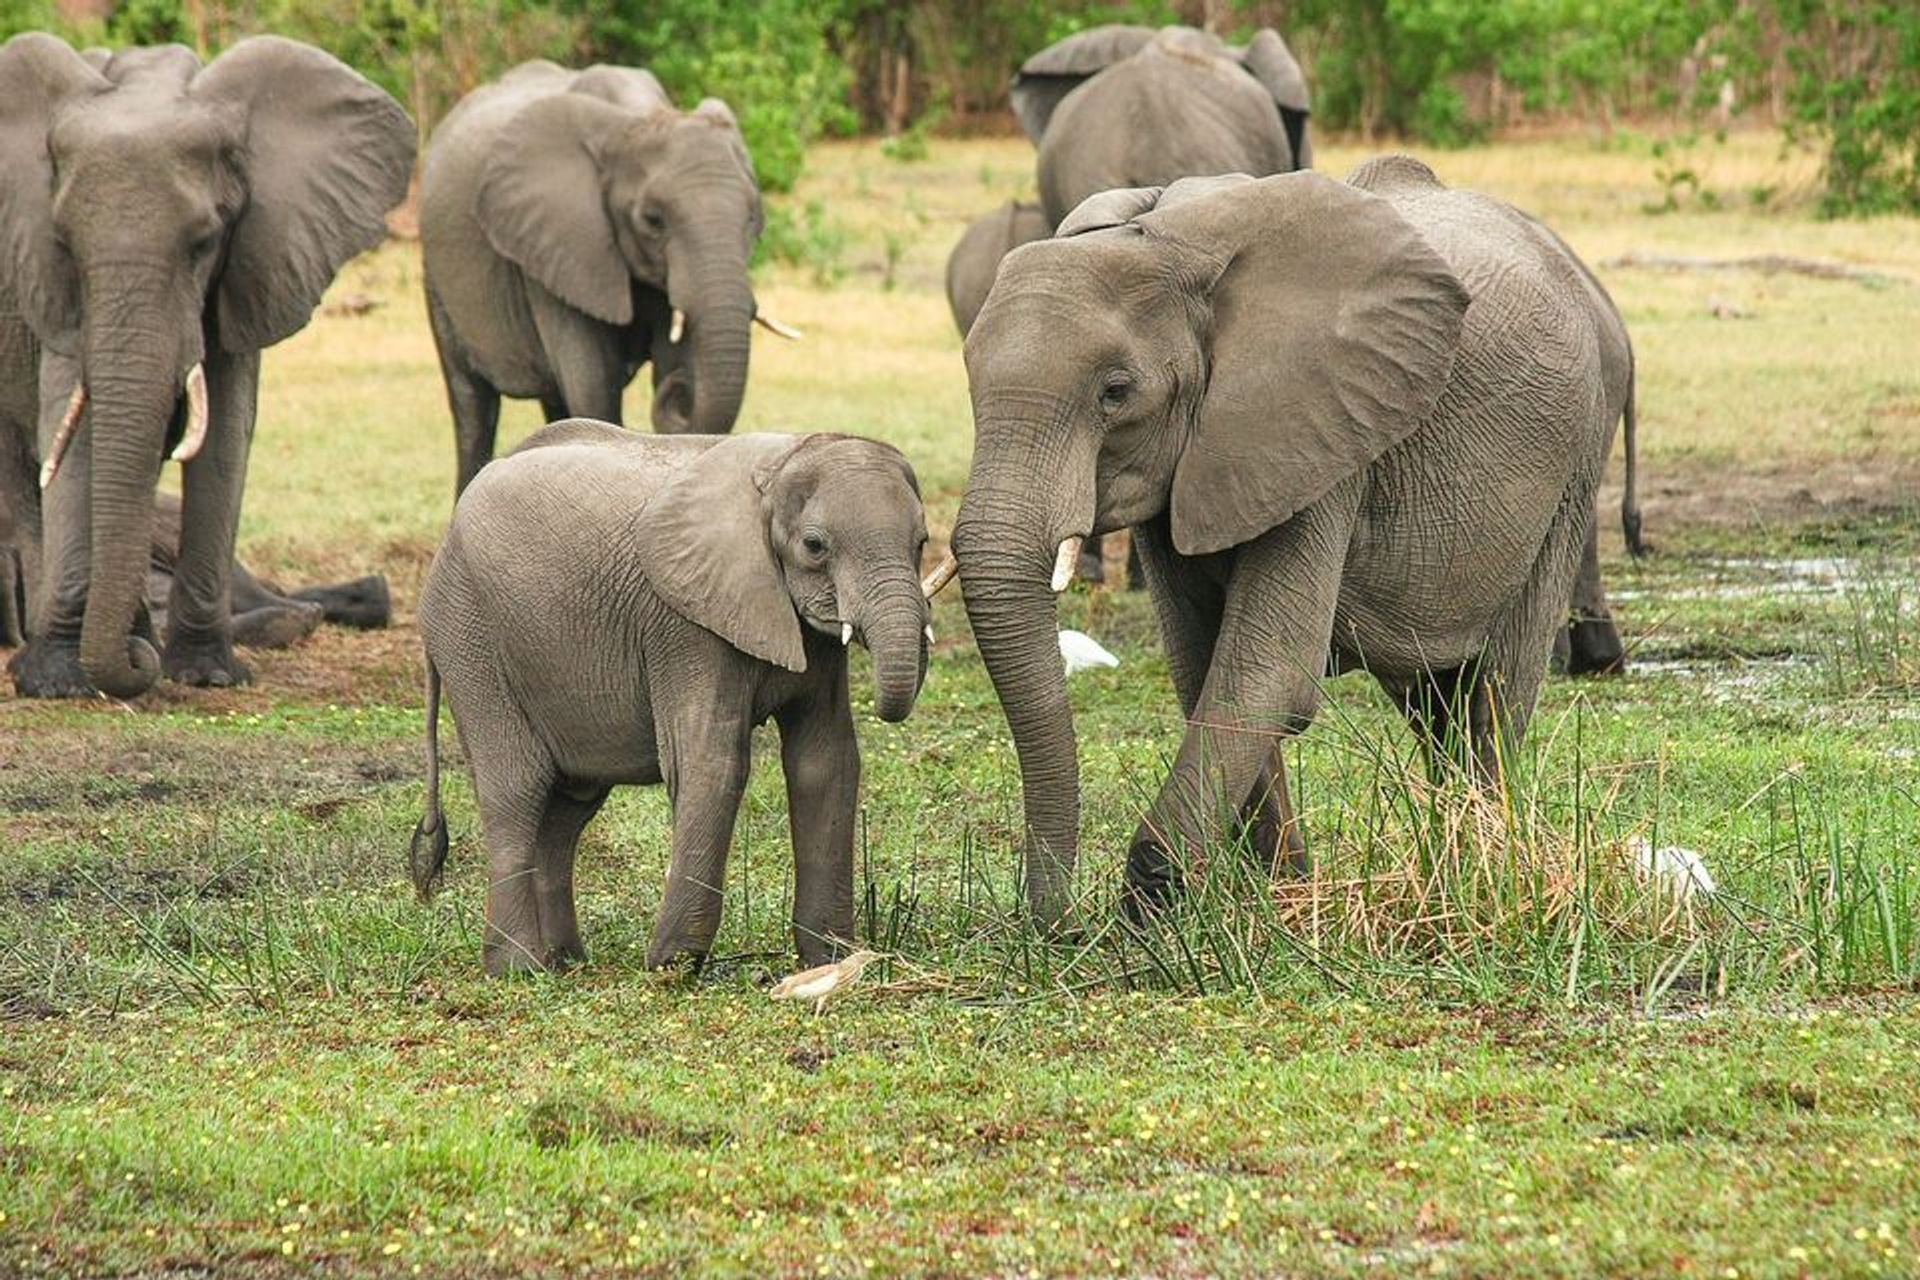 Ivory trade regulation could be tightened for EU member states 